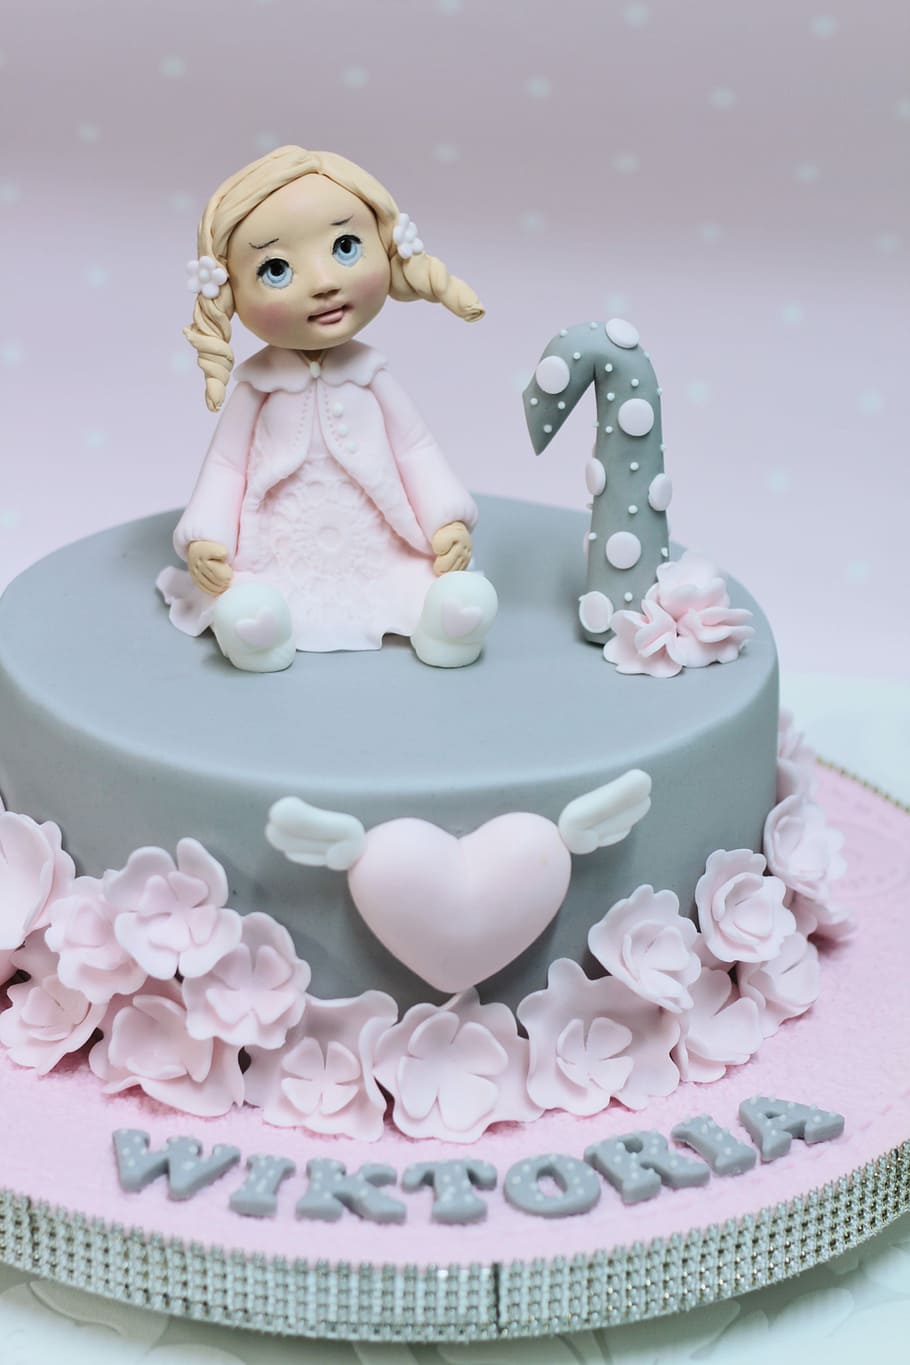 One, Old, Cake, Birthday, Decoration, one year old, creative, the art of, girly, sweet food